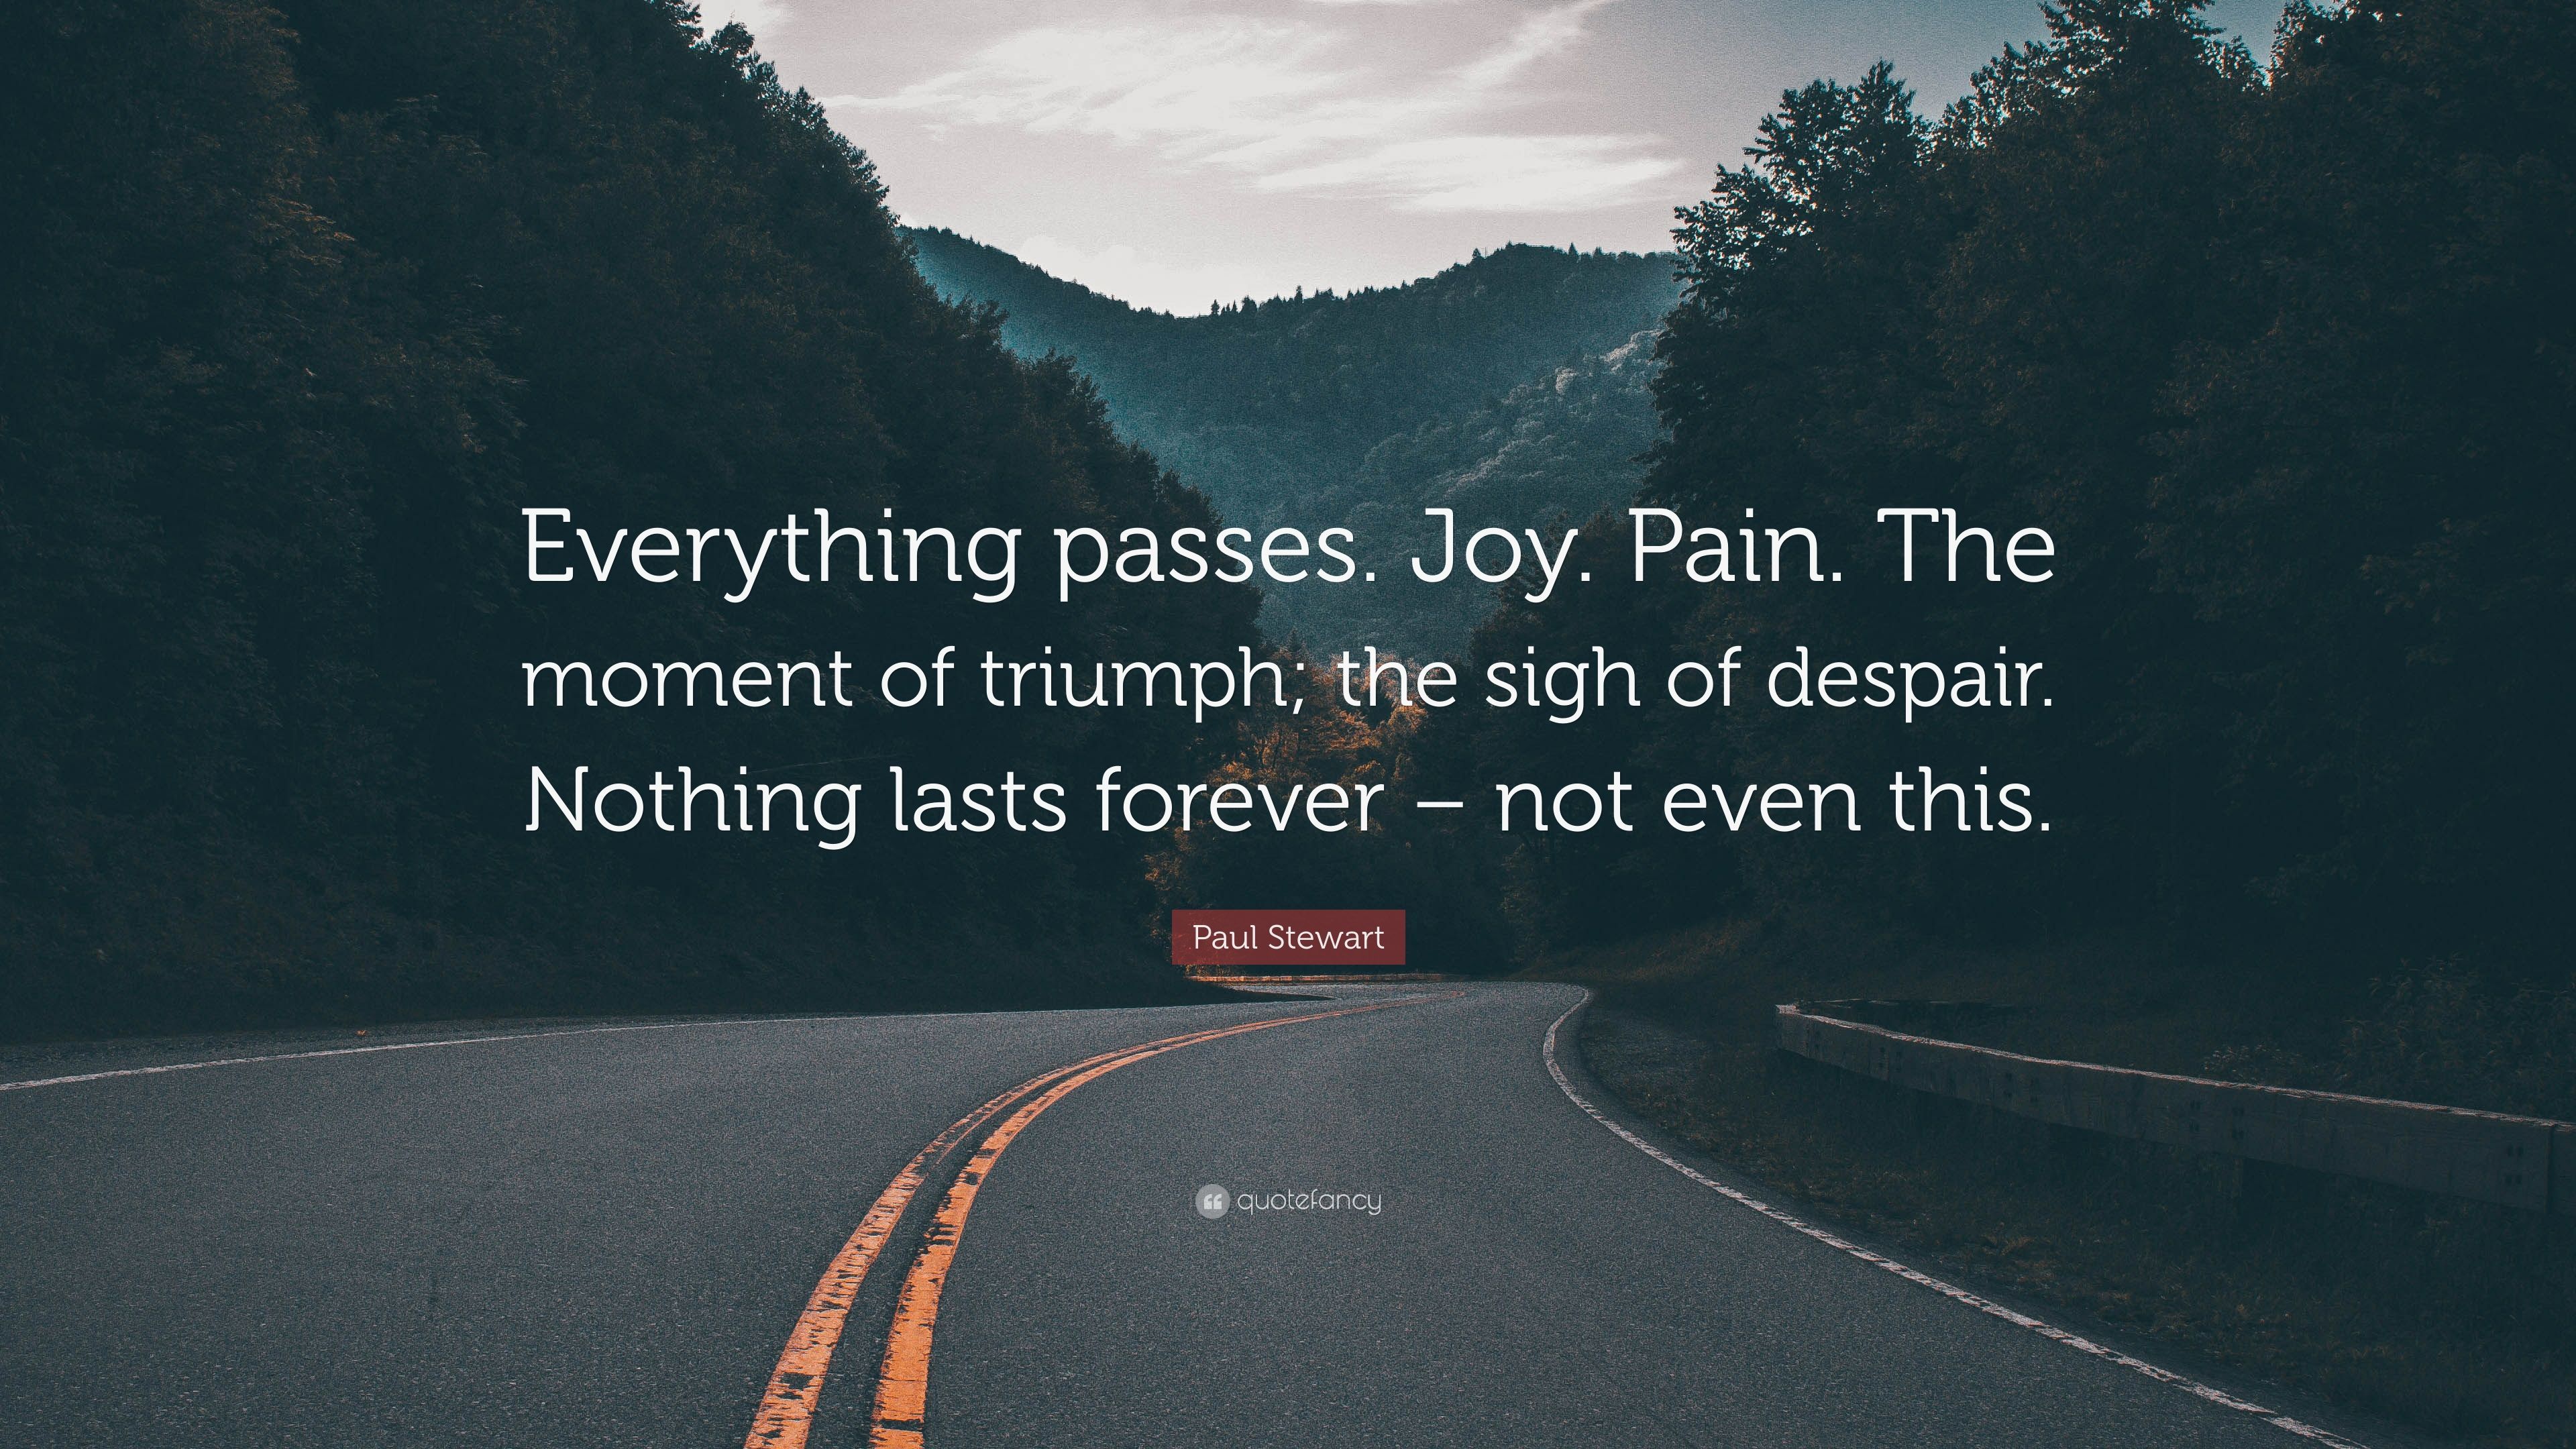 Paul Stewart Quote: “Everything passes. Joy. Pain. The moment of triumph; the sigh of despair. Nothing lasts forever